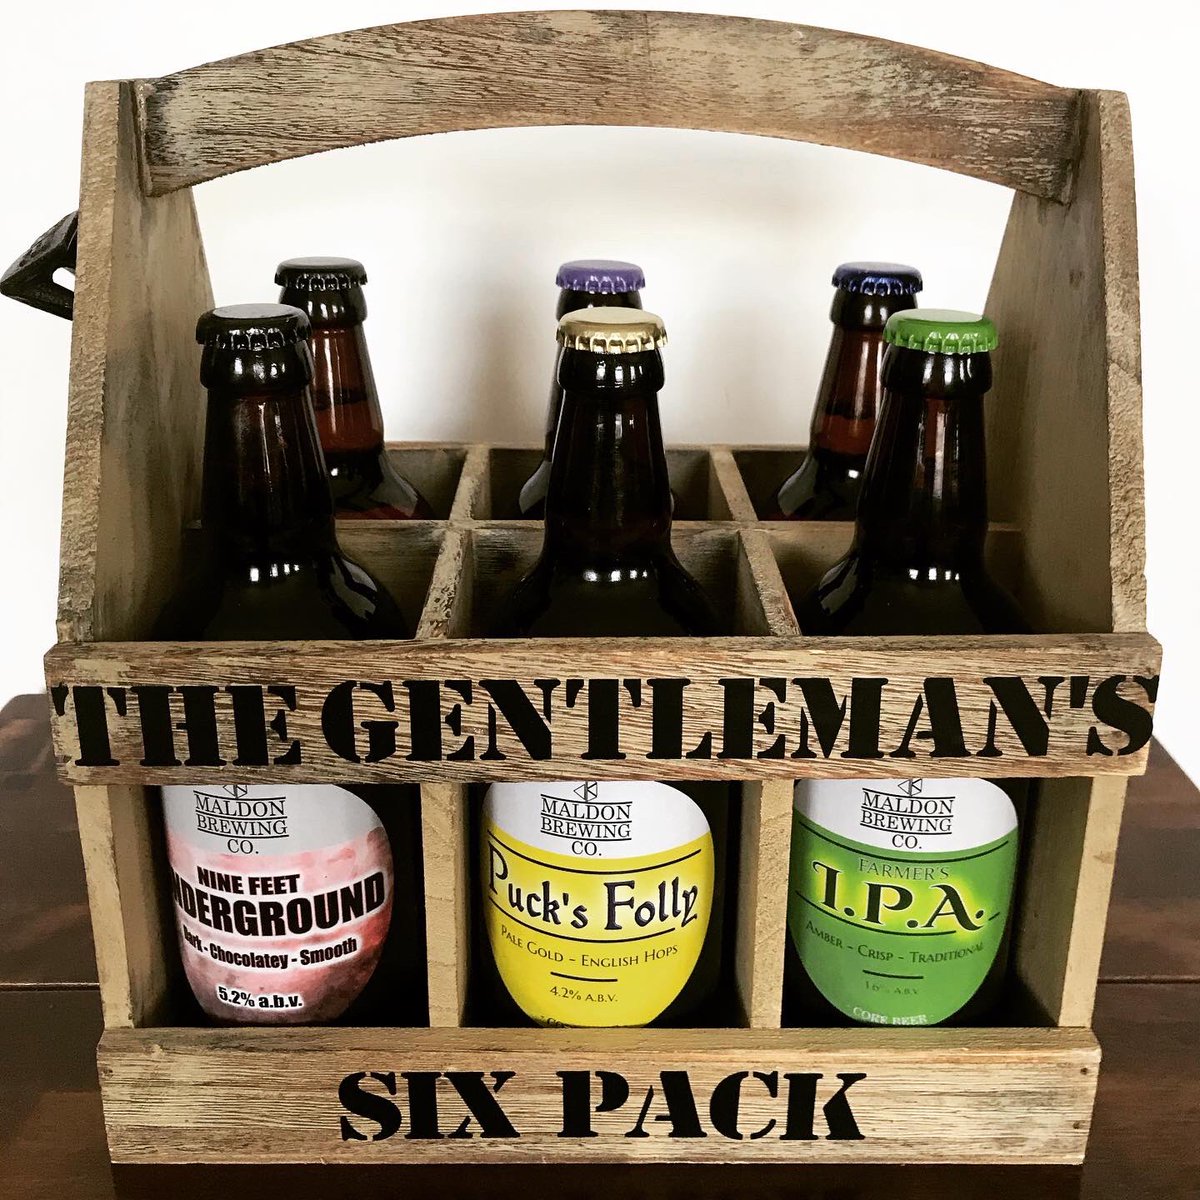 @TheoPaphitis Adding some great new products to the website today. Lots of ideas for gifting and a Virtual office Christmas party box too! Just in case you’re starting to look for some inspiration Mr P secrethamper.com #SBS #ShopSmall